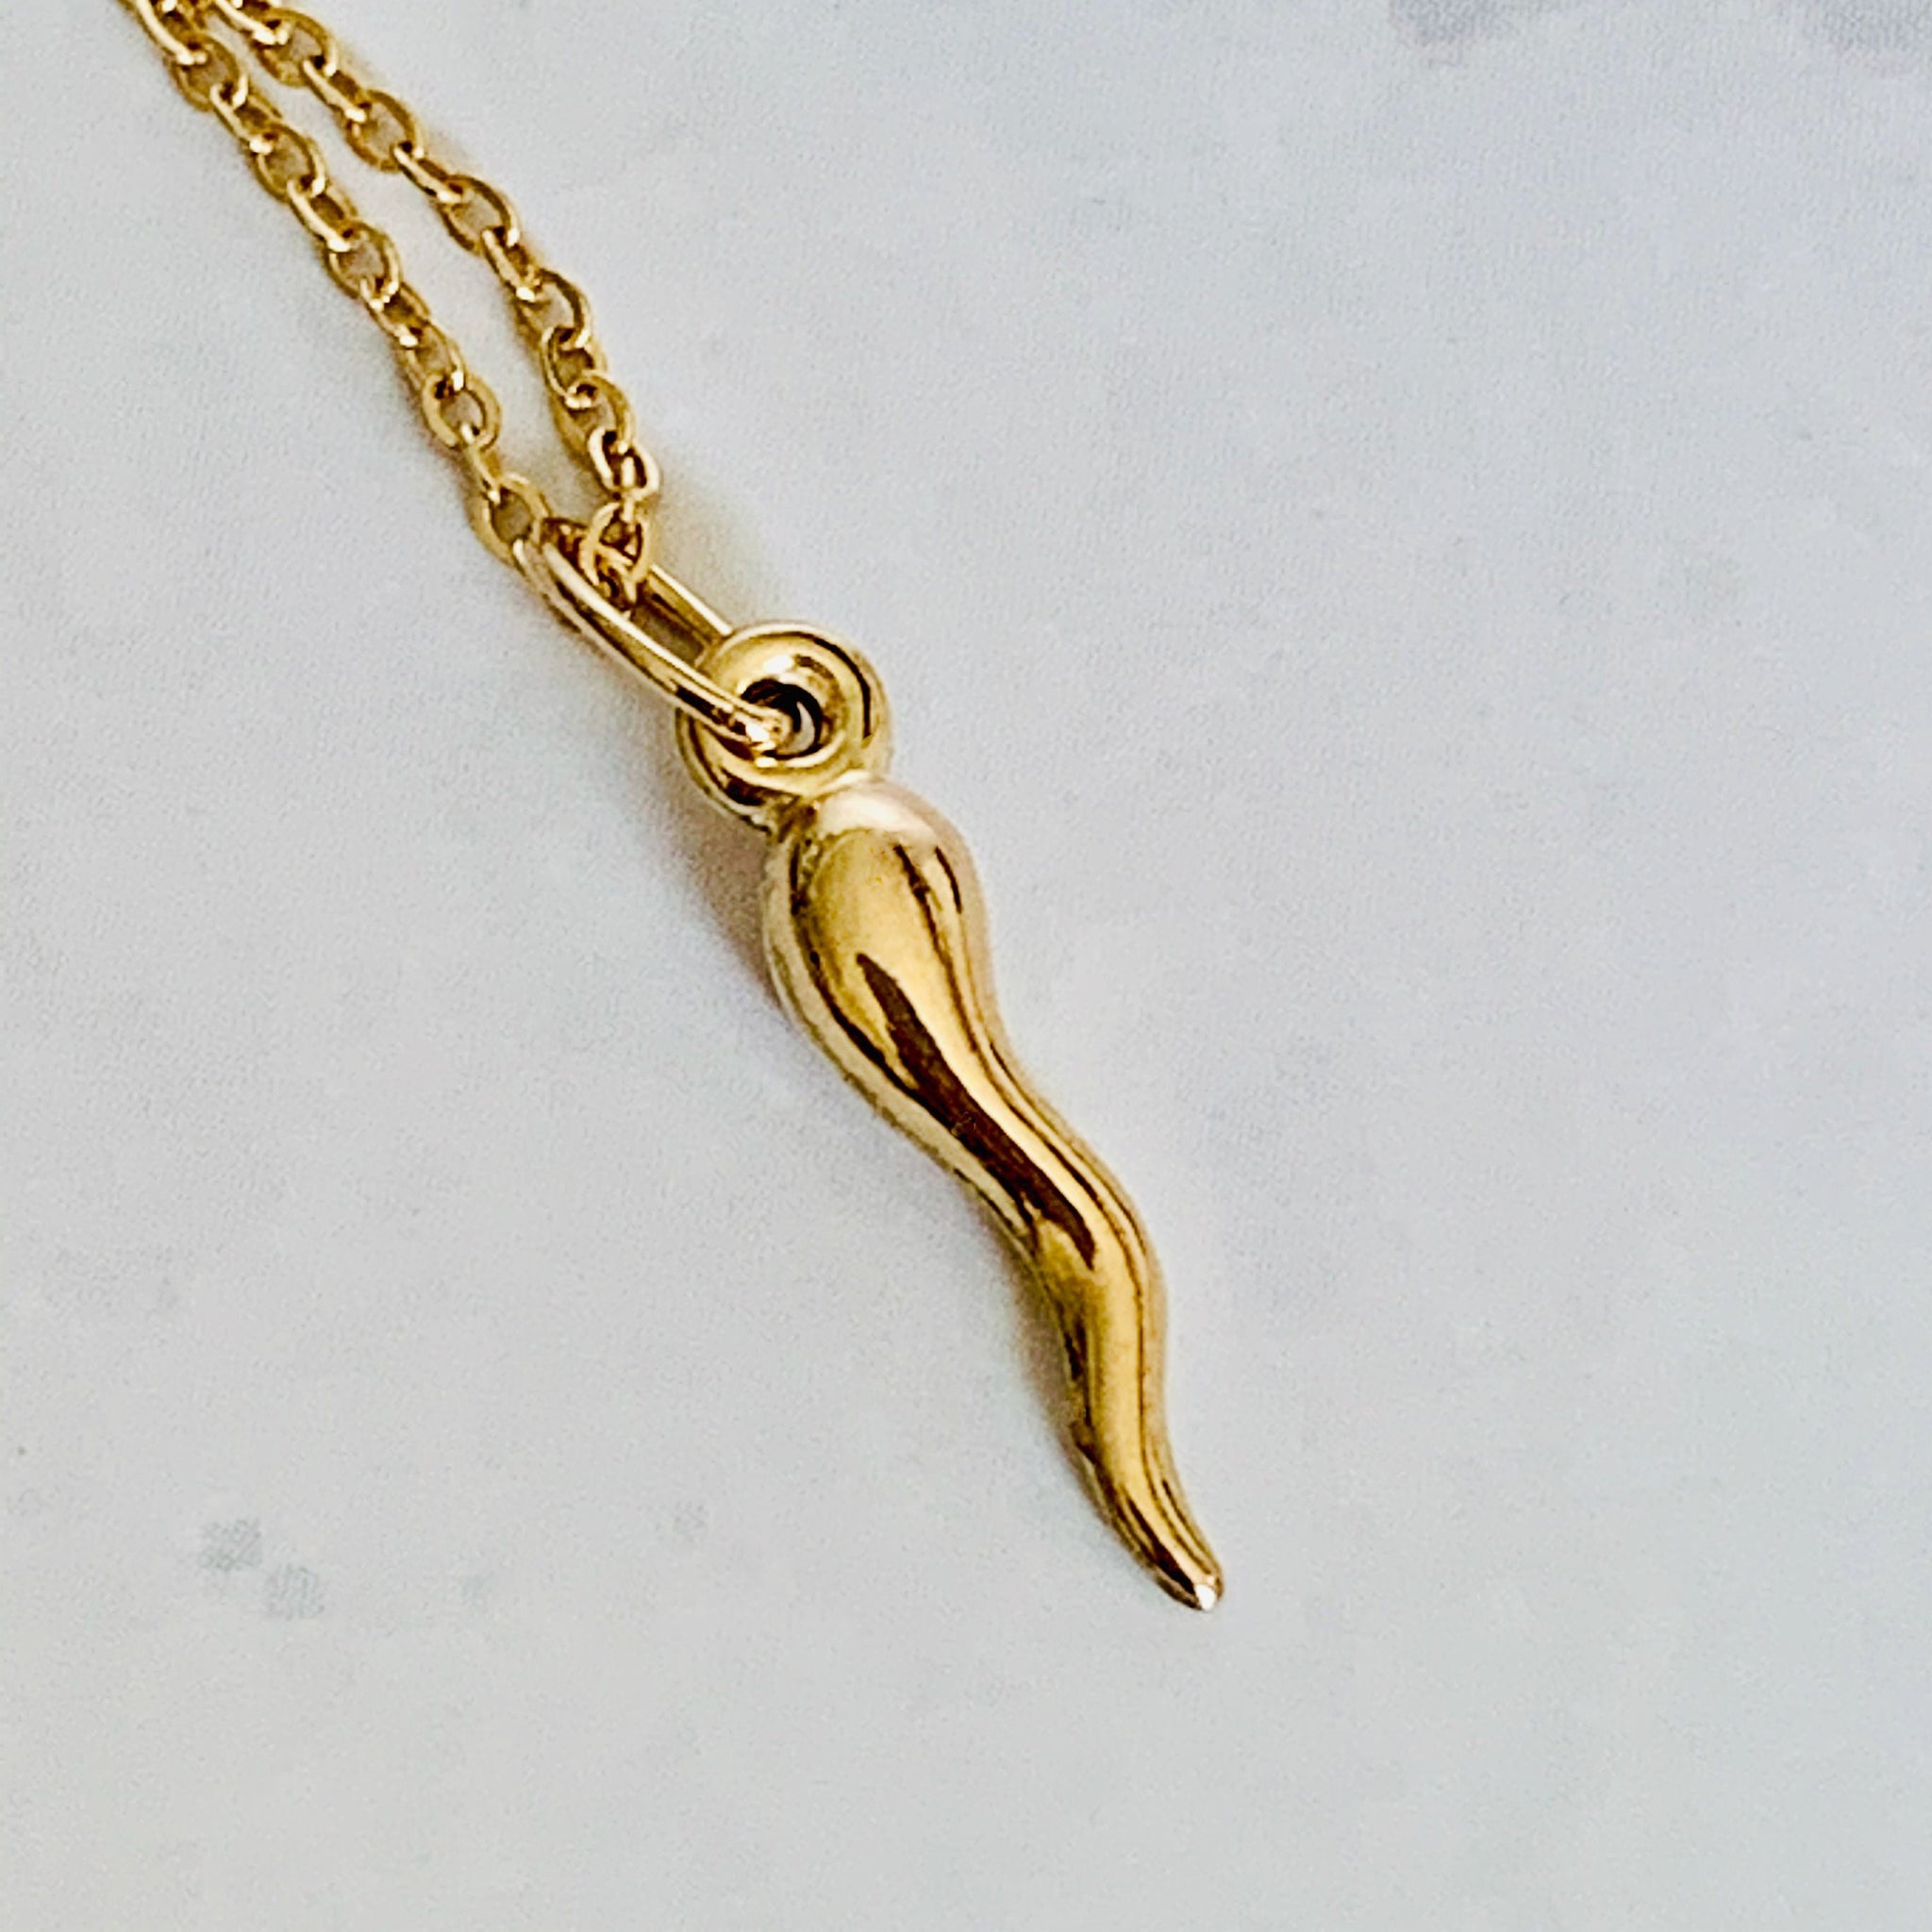 Pendants, Charms, Italianm charms, 14k gold charms, yellow gold